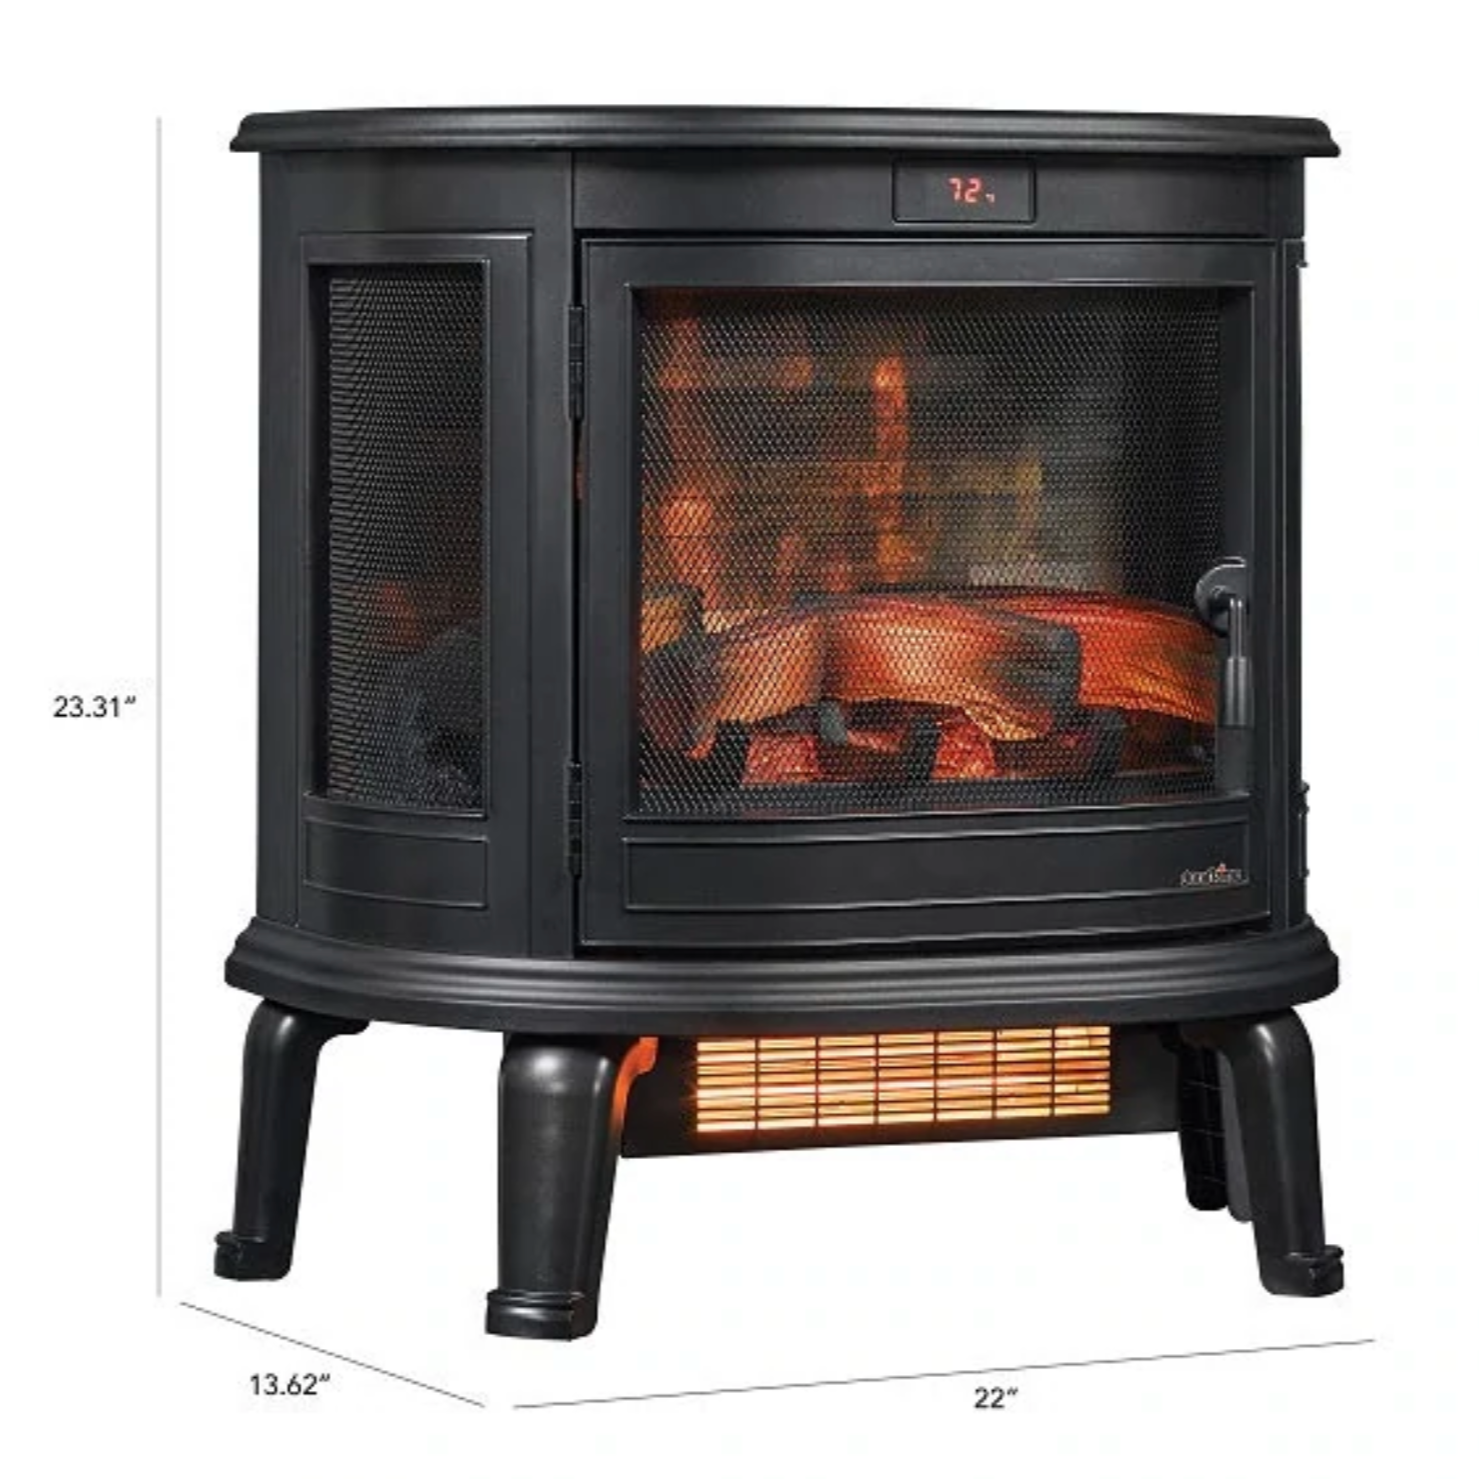 Electric Stove Heater - Glamping Dome Store